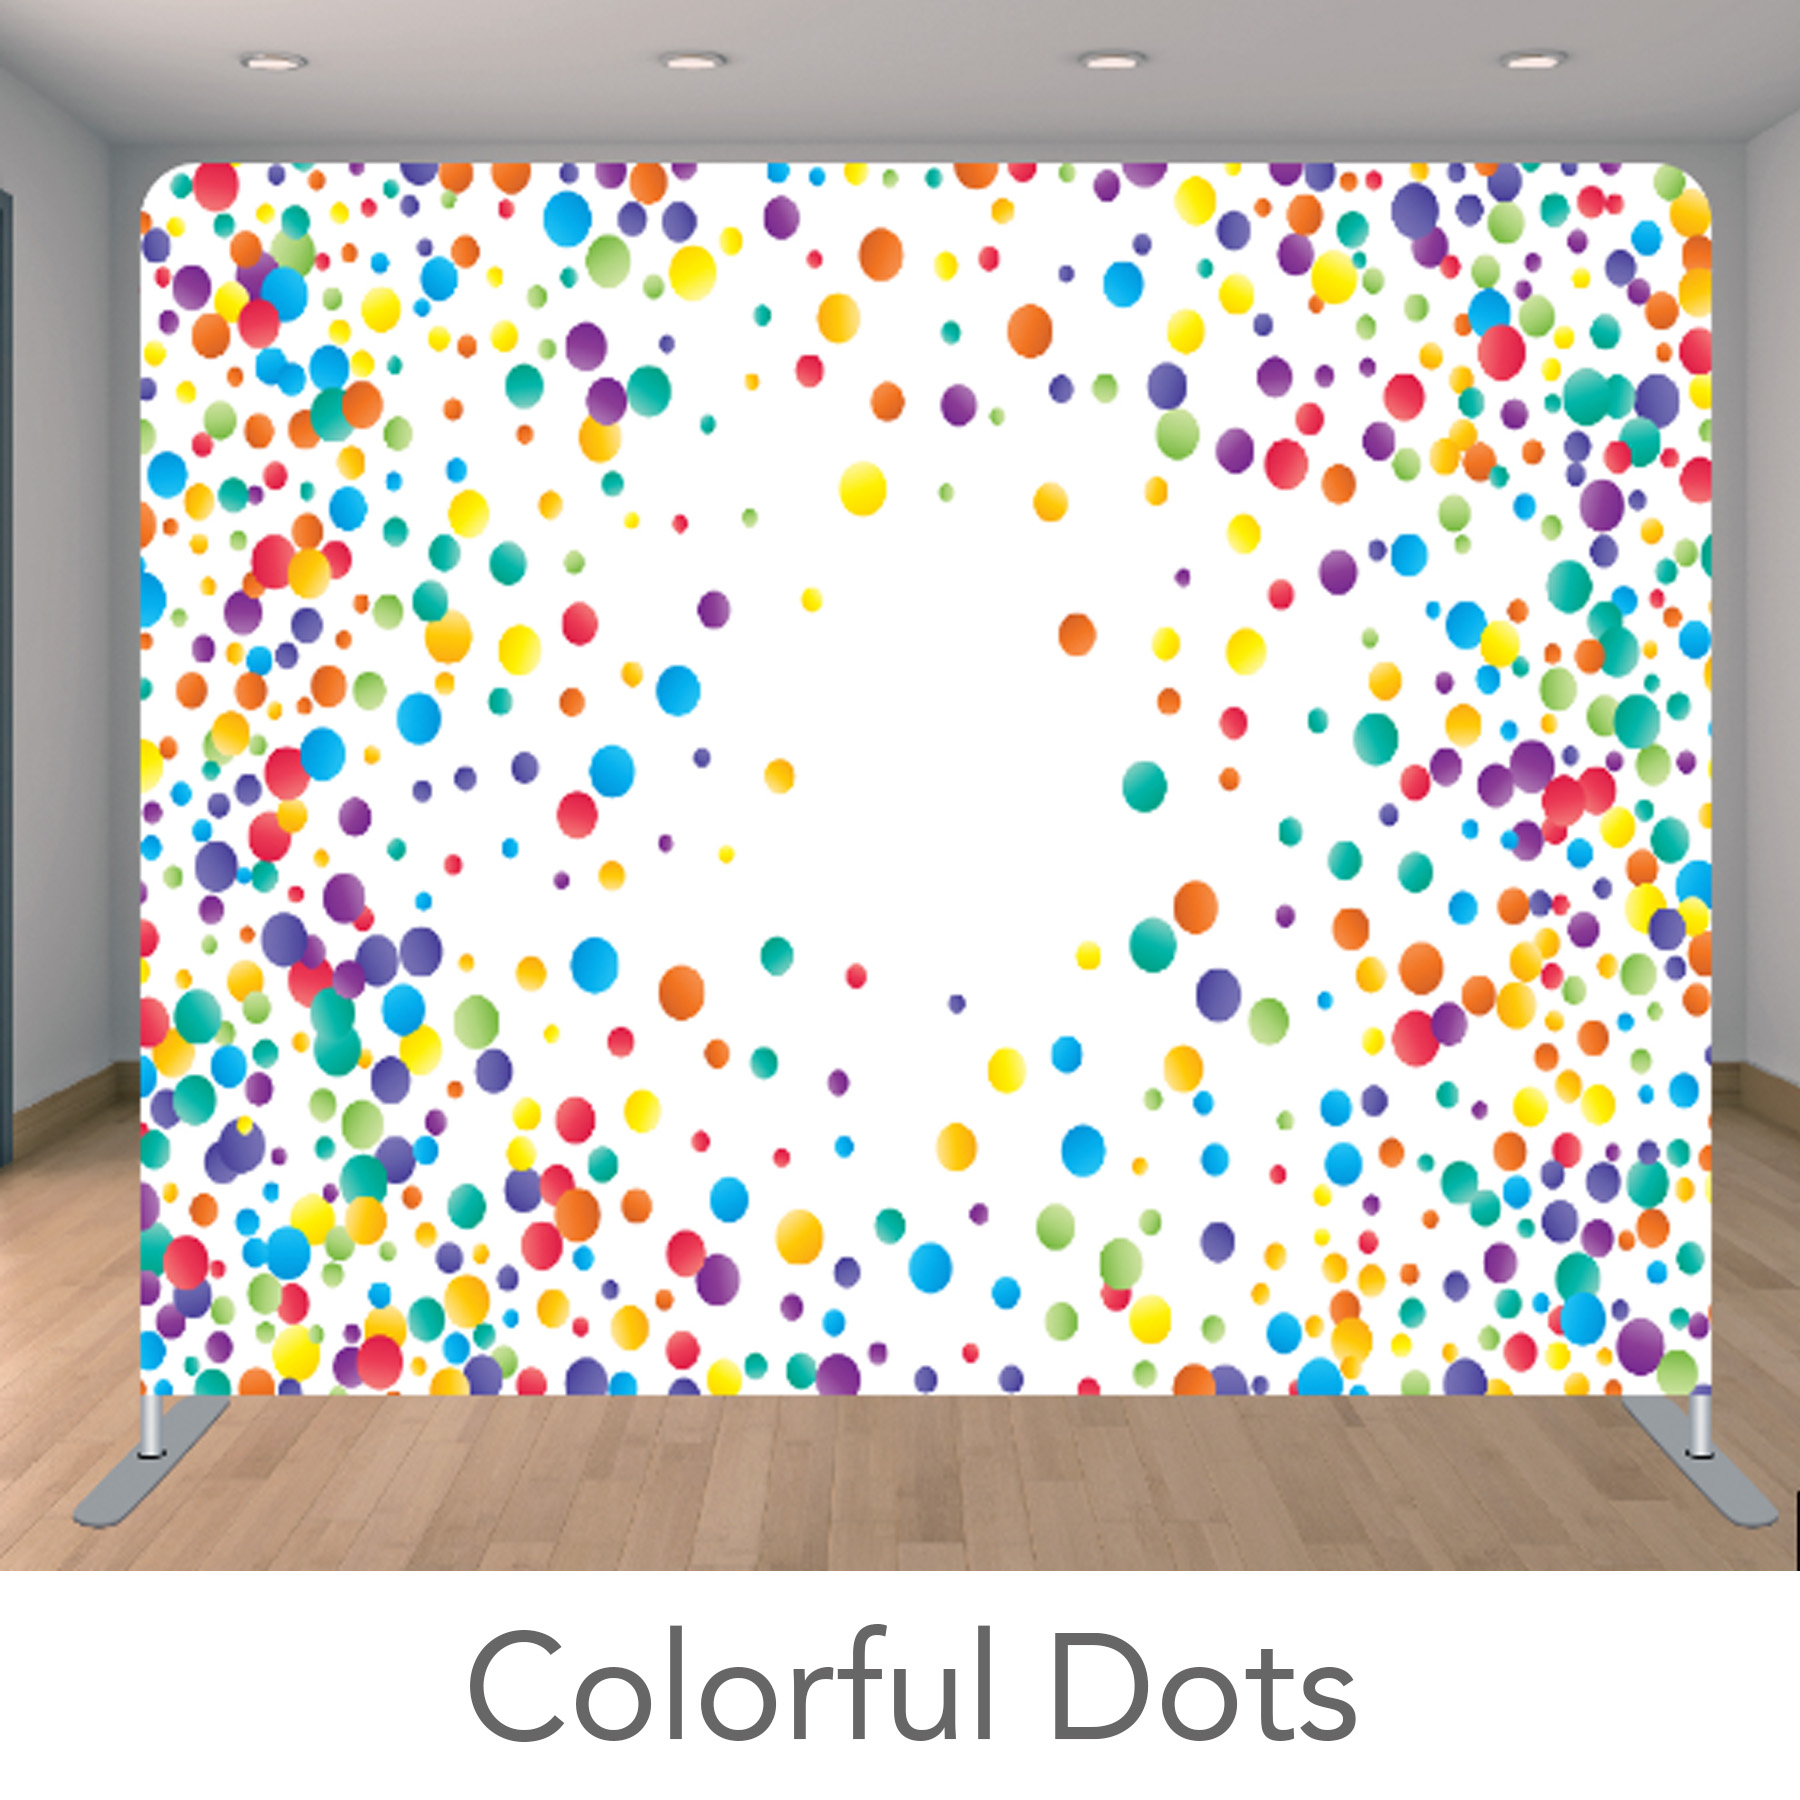 Colorful Dots.jpg